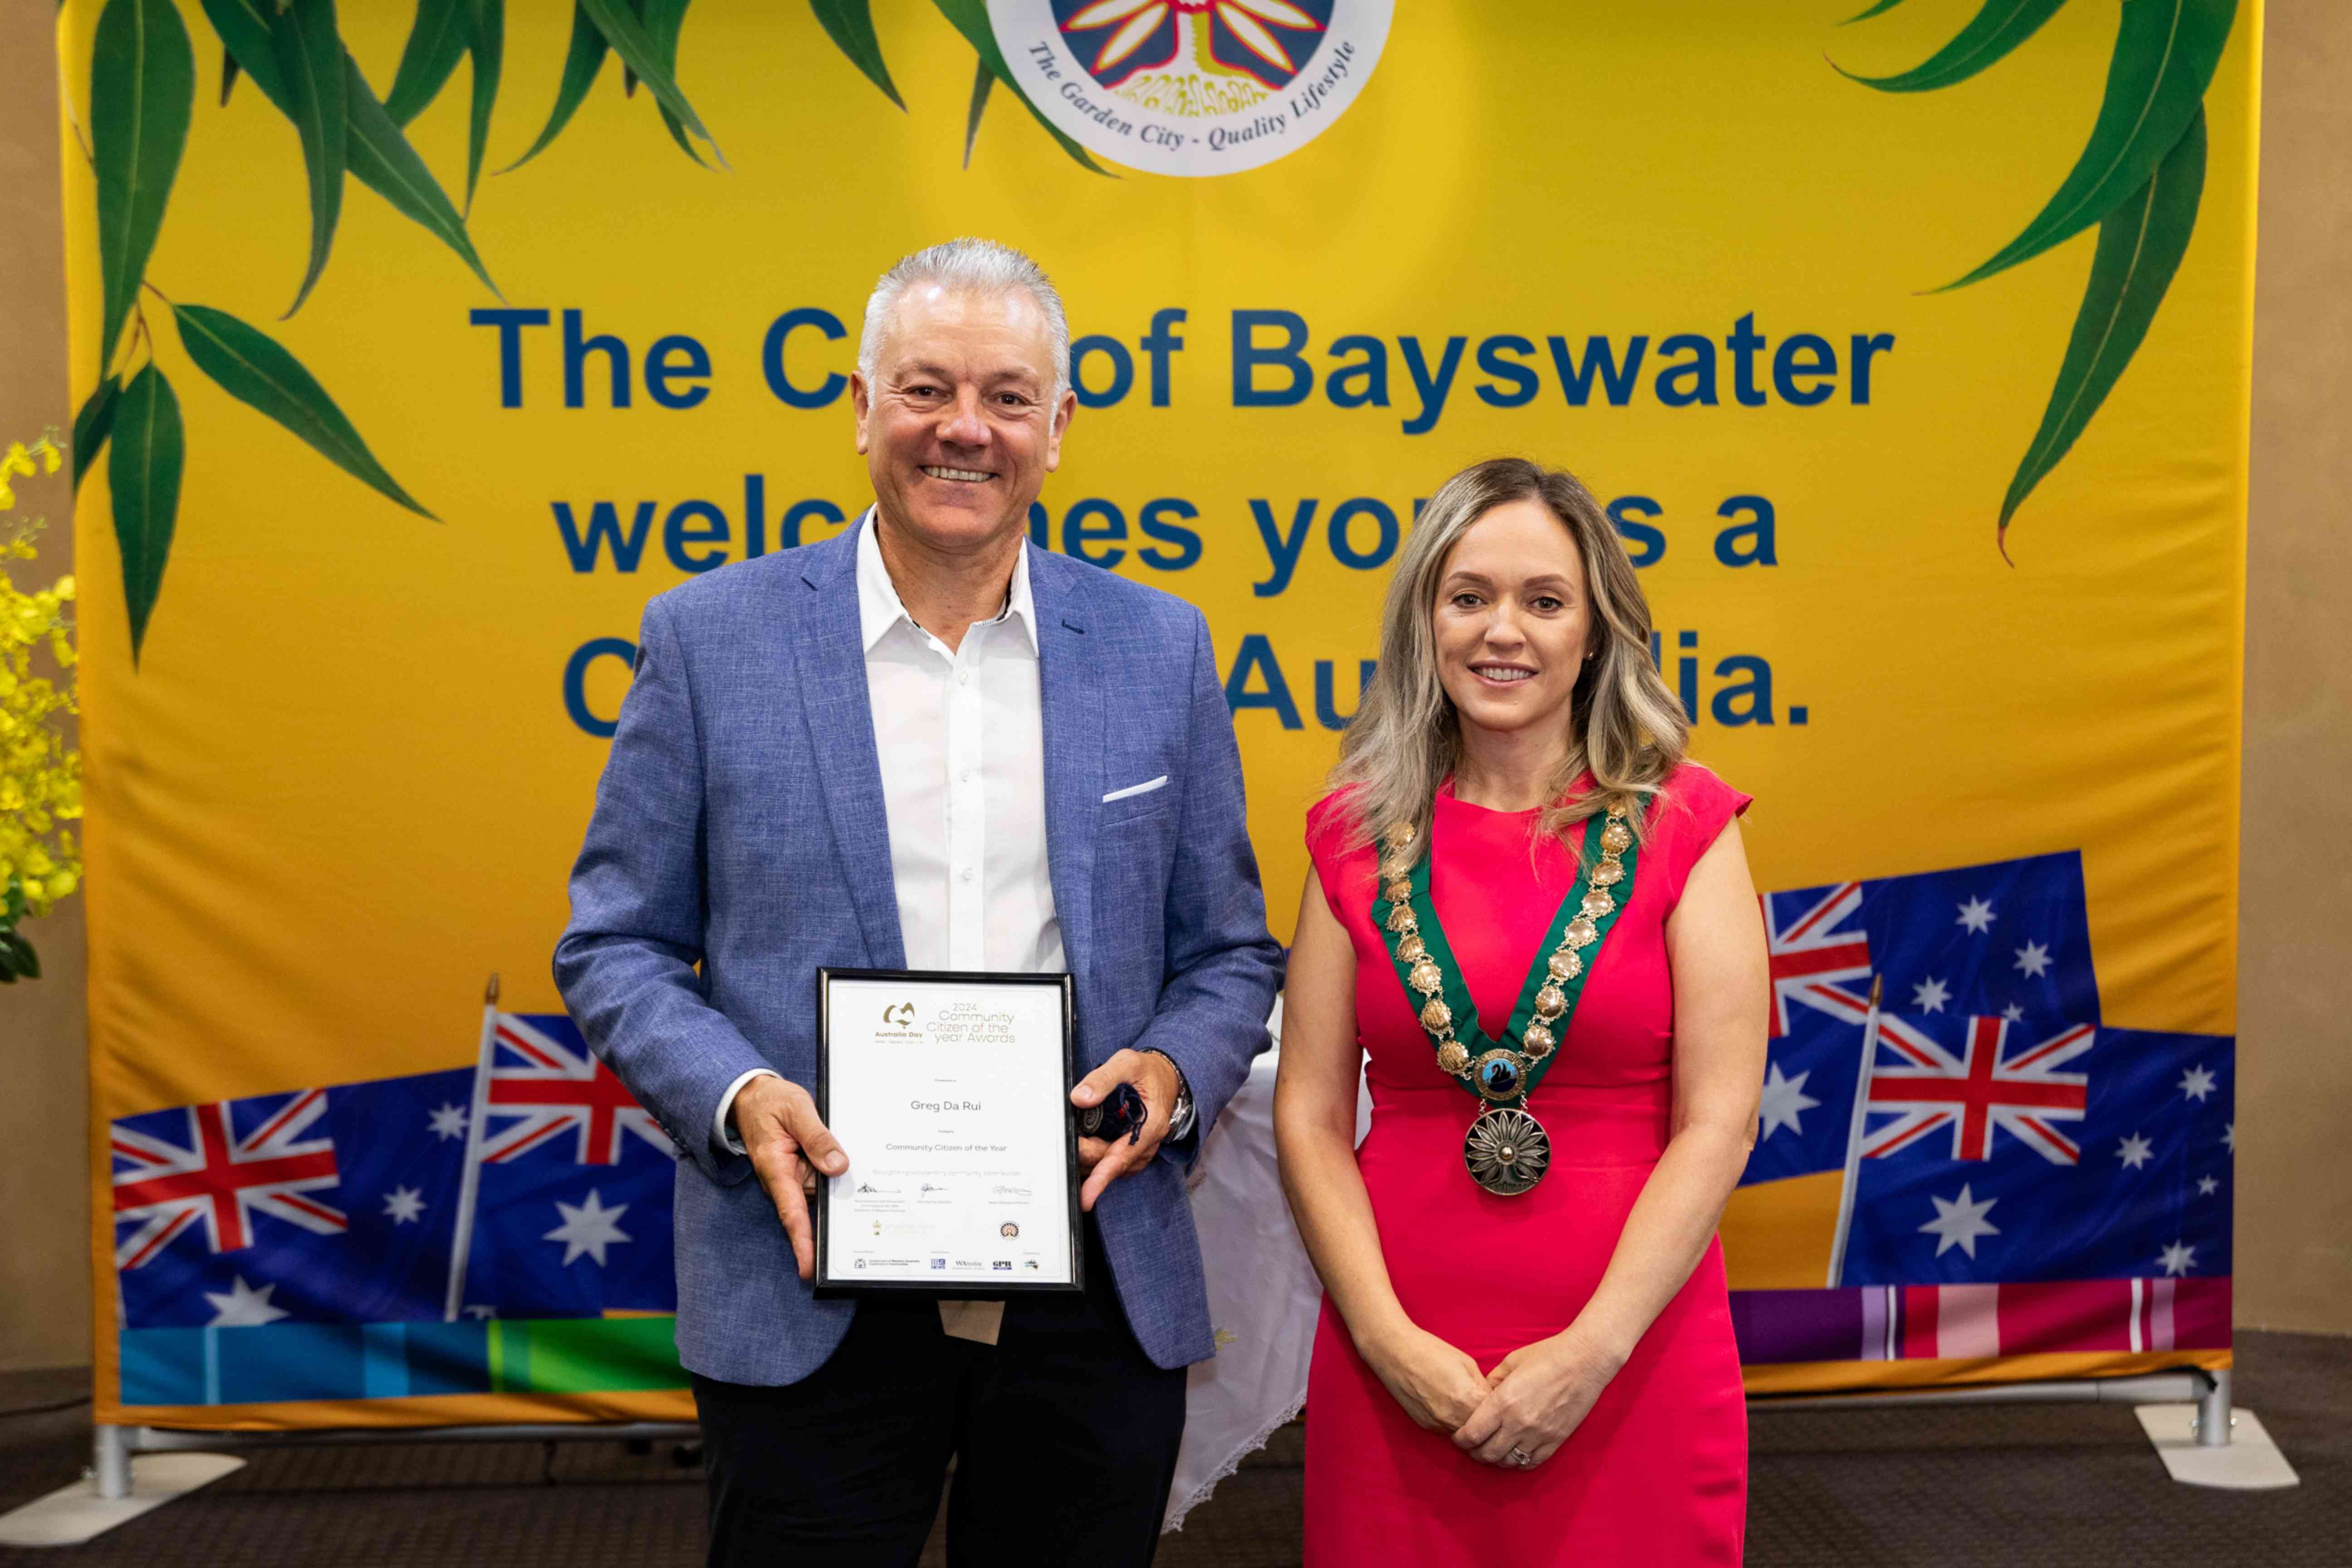 Top Bayswater citizens celebrated with awards